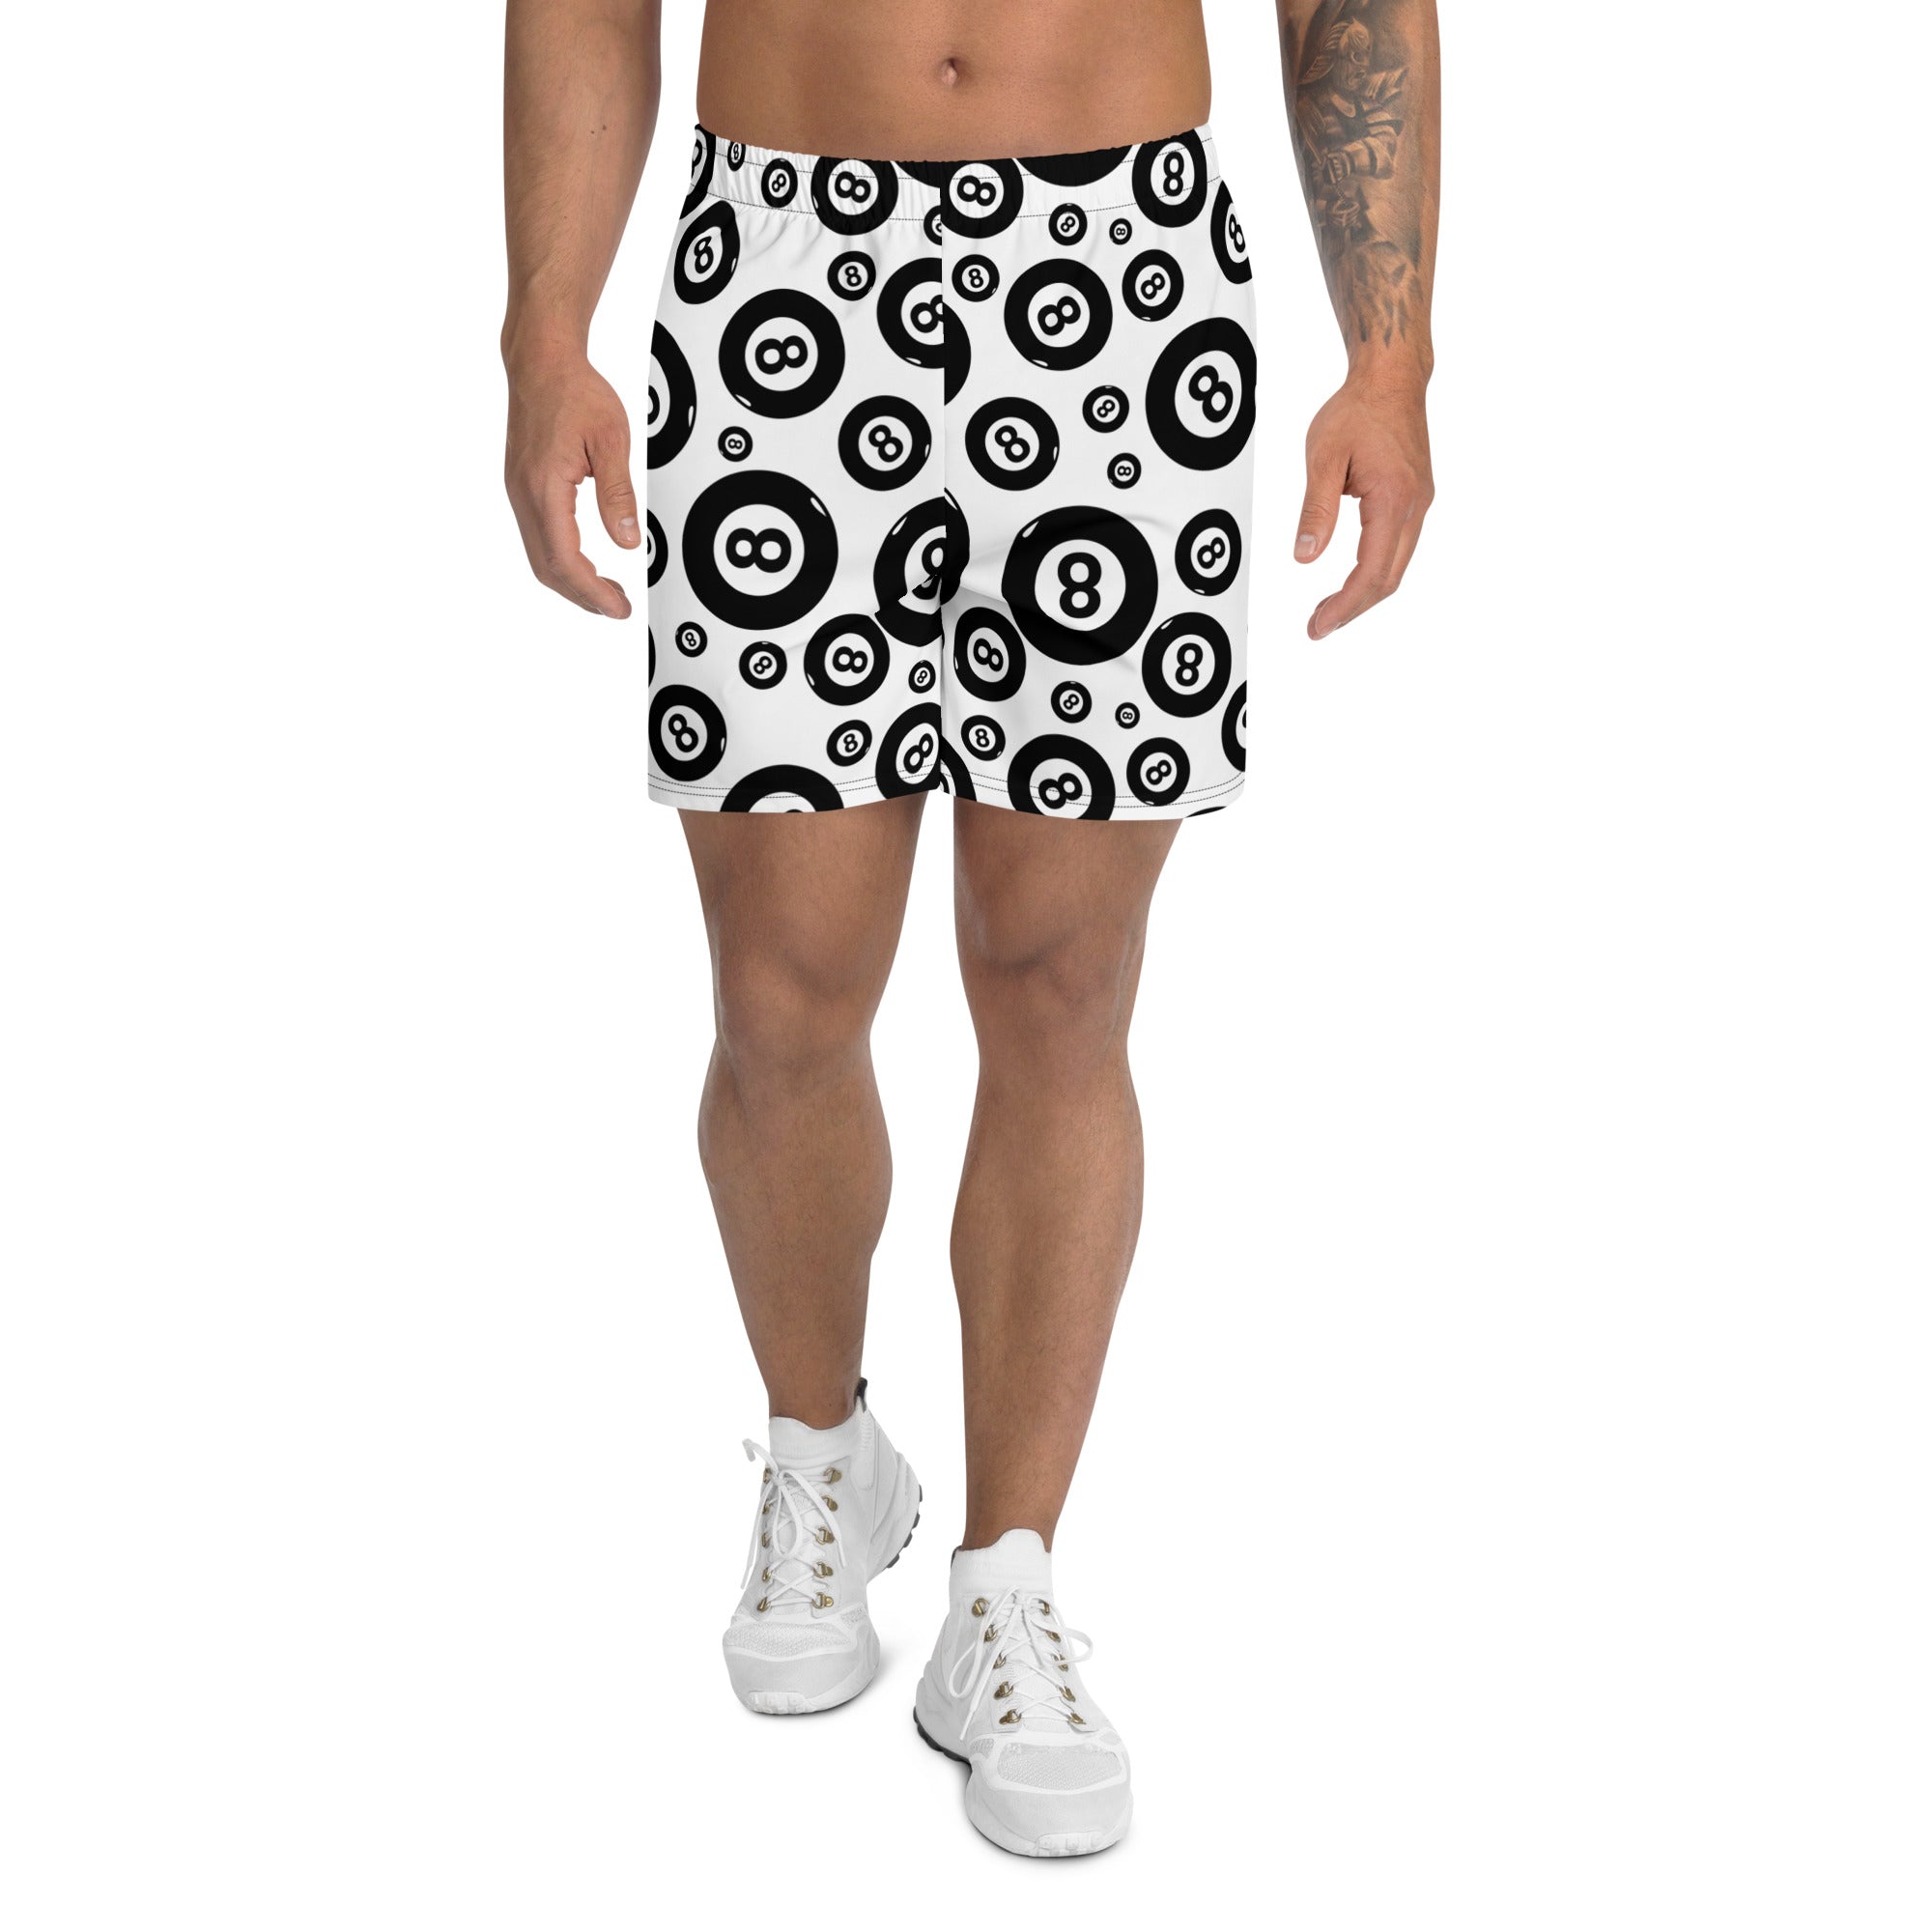 Eight Ball Athletic Shorts